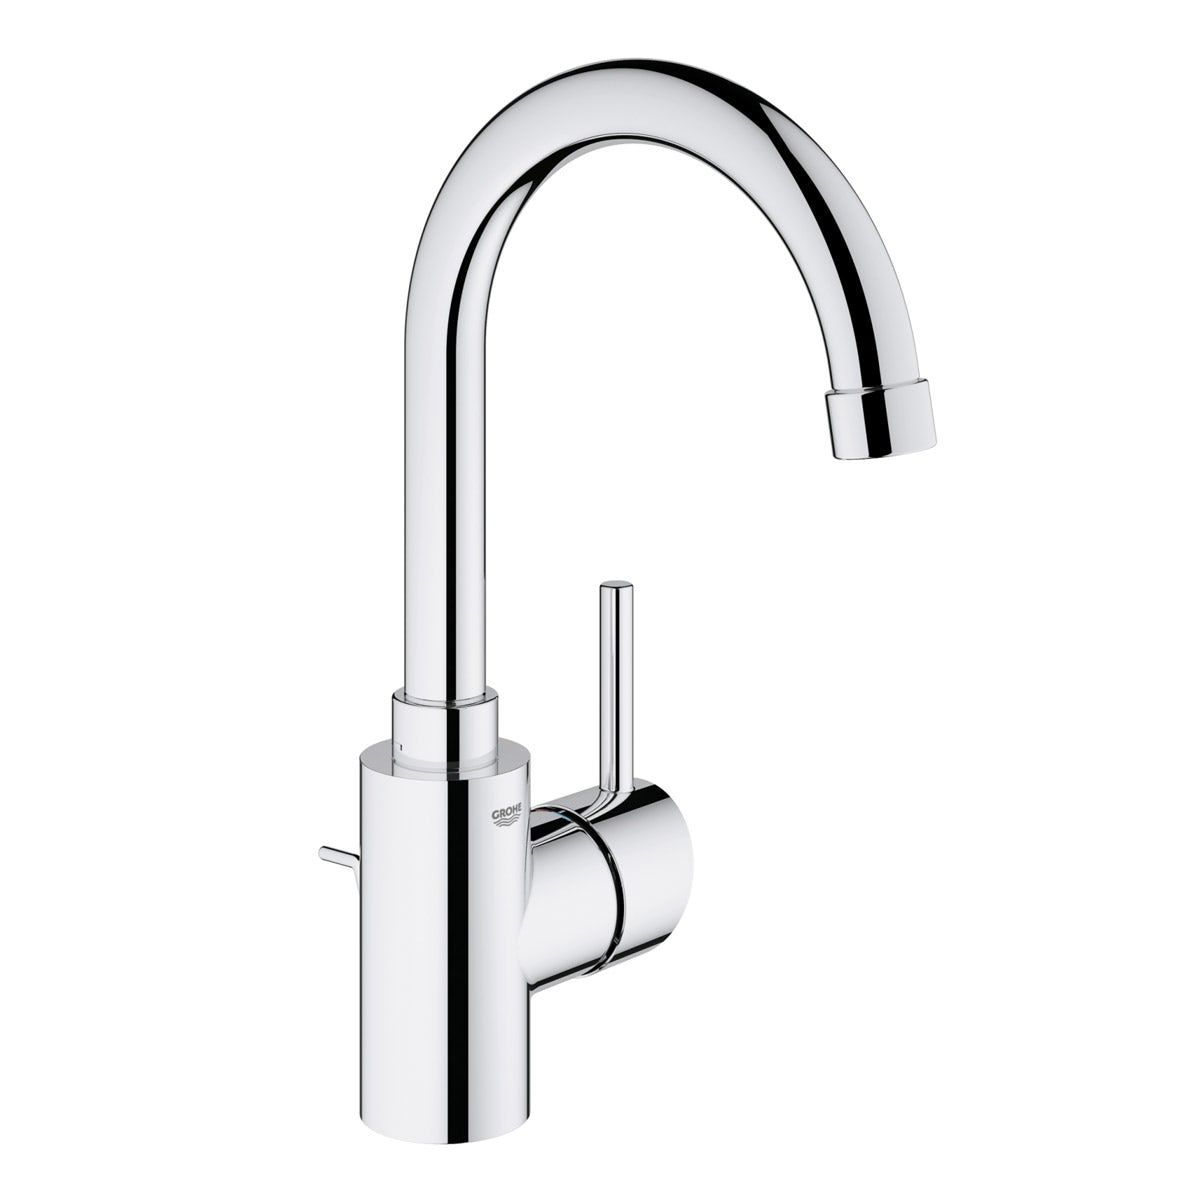 Grohe Concetto side lever basin mixer tap